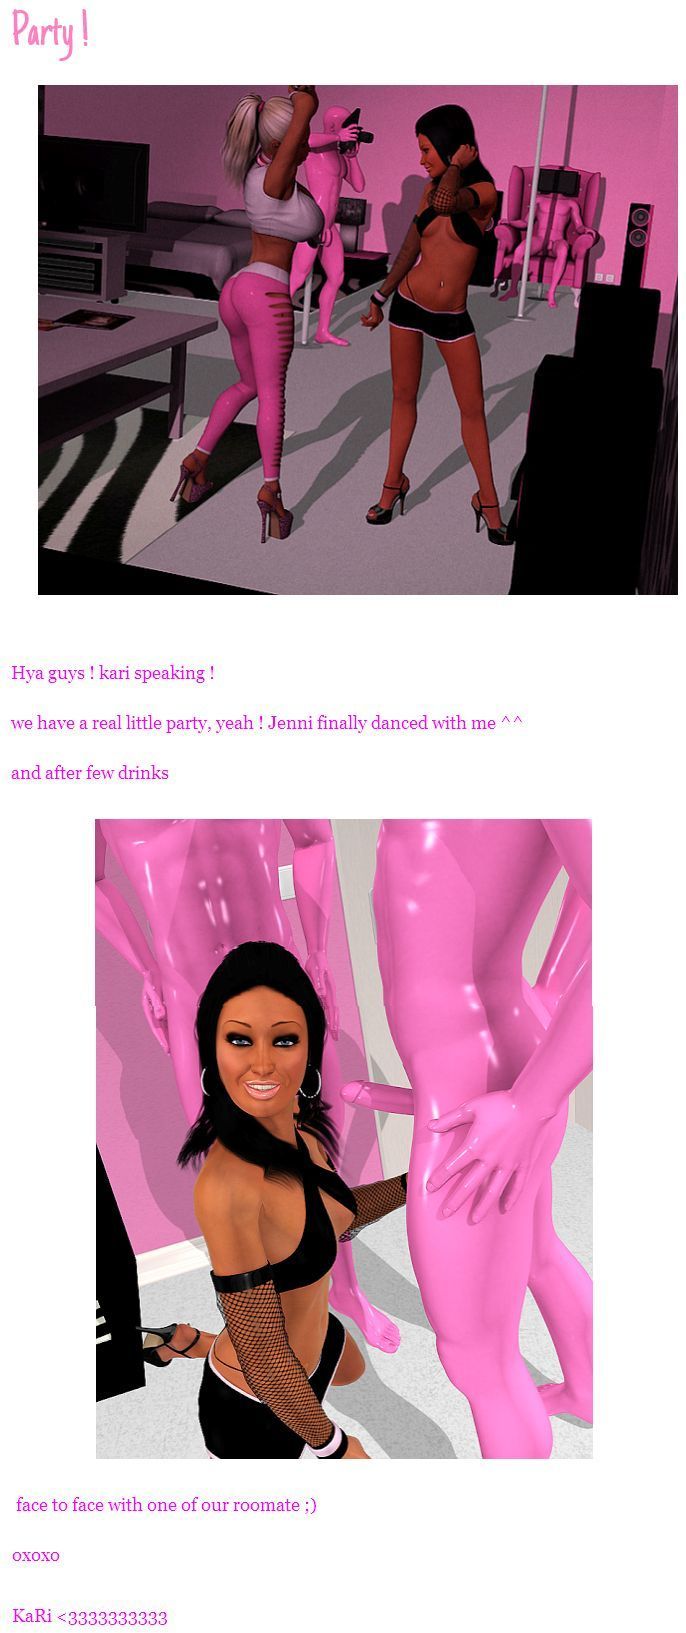 The Pink Room - part 5